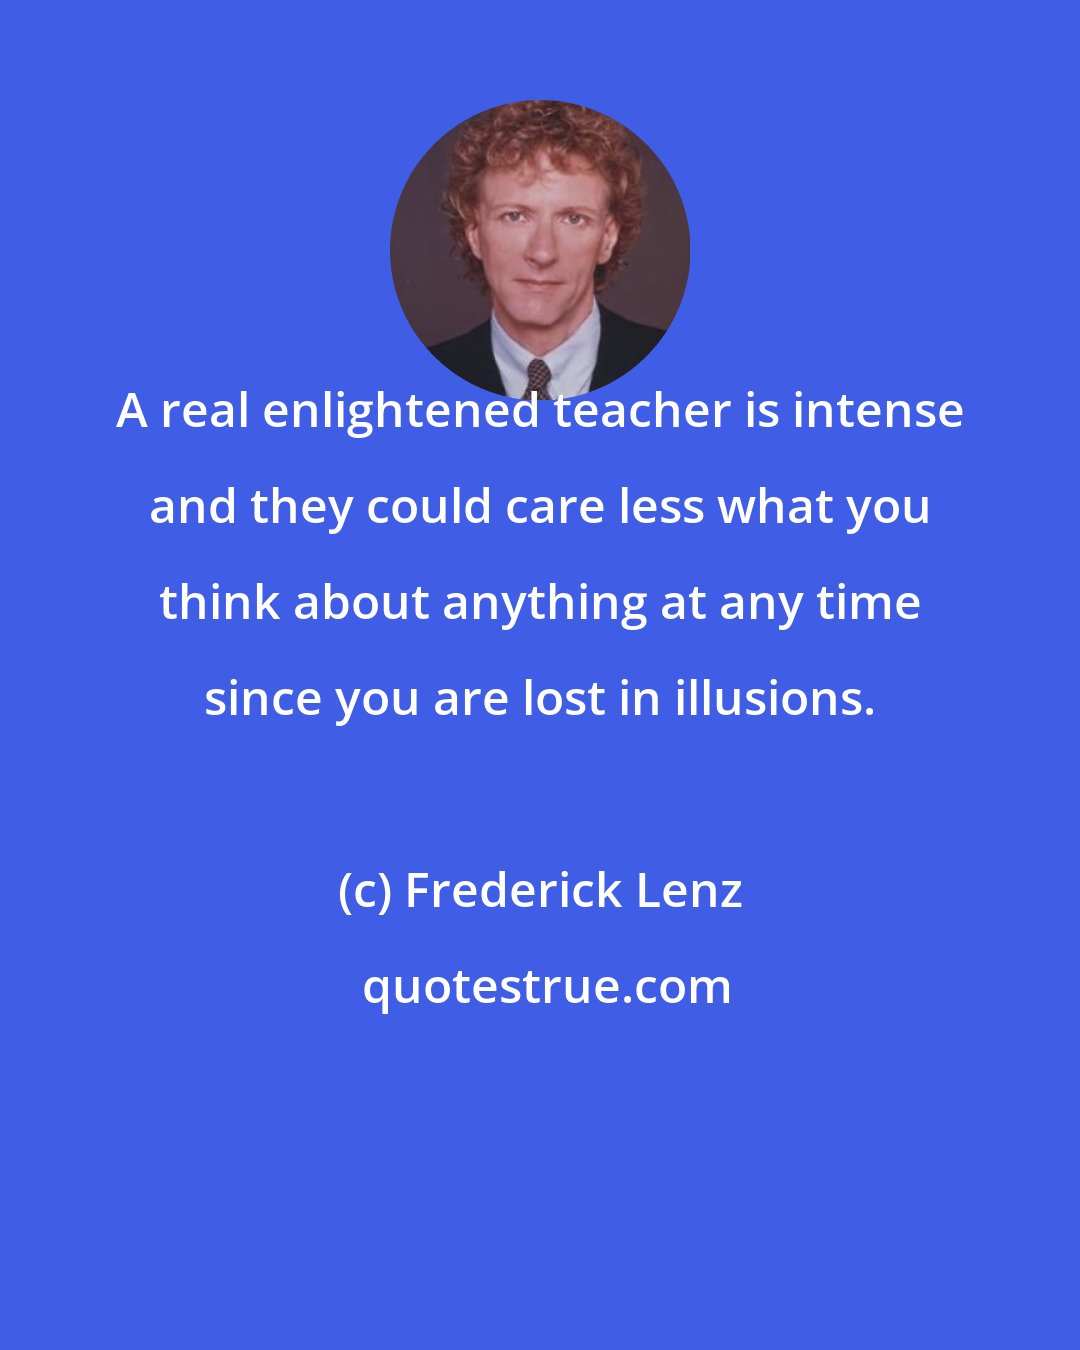 Frederick Lenz: A real enlightened teacher is intense and they could care less what you think about anything at any time since you are lost in illusions.